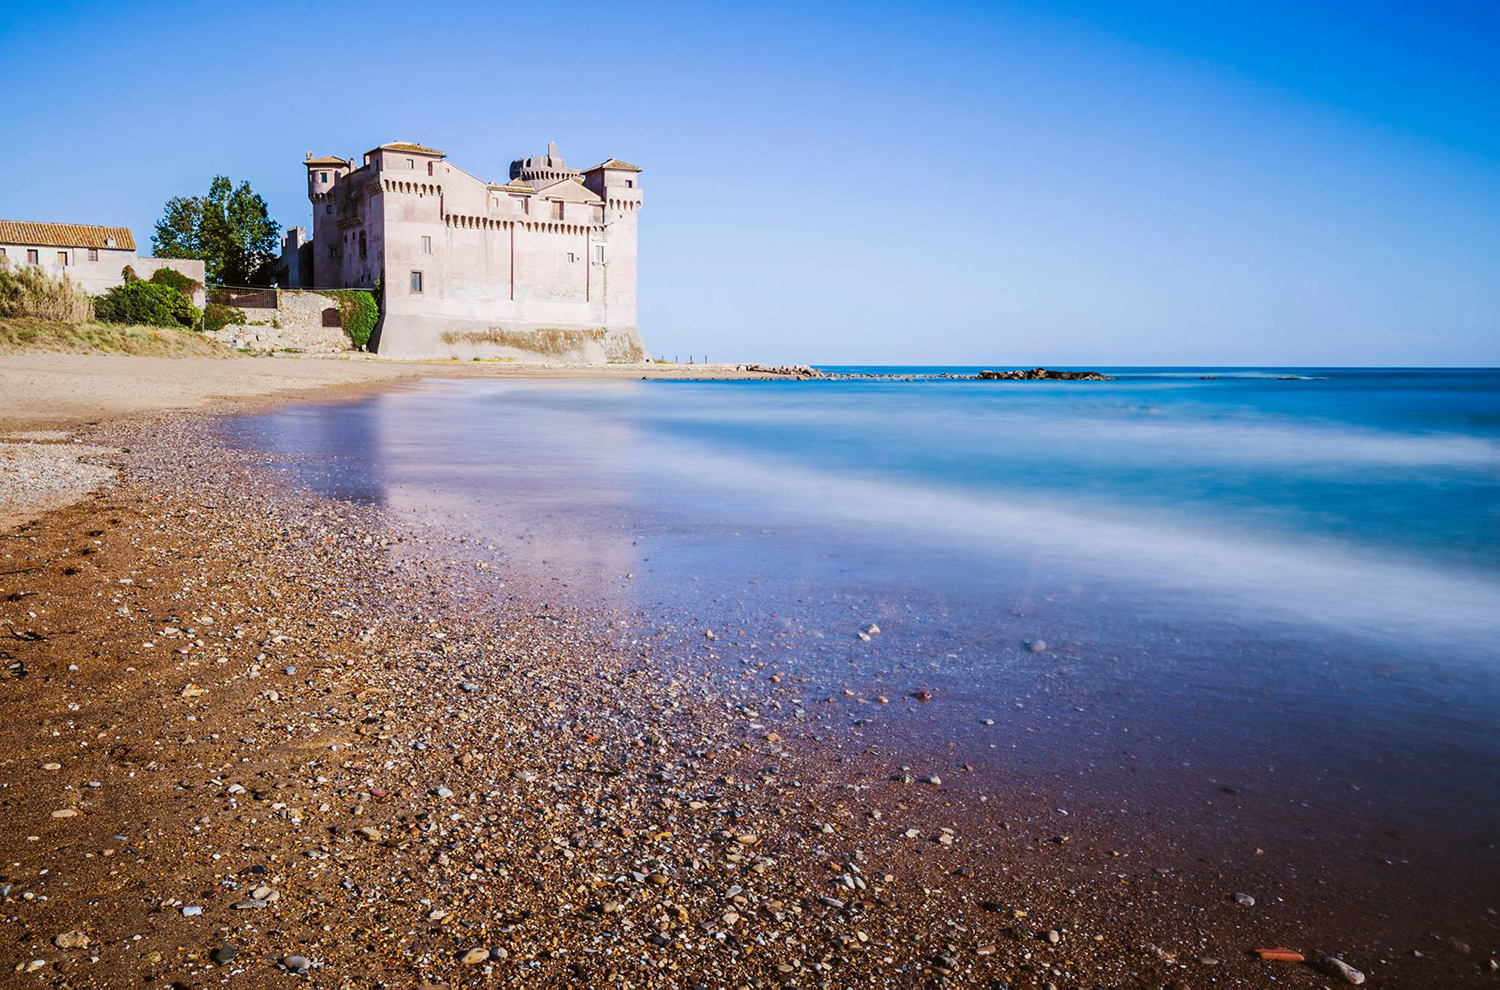 From the 25th of April 2017 the Castle of Santa Severa will be open throughout the year